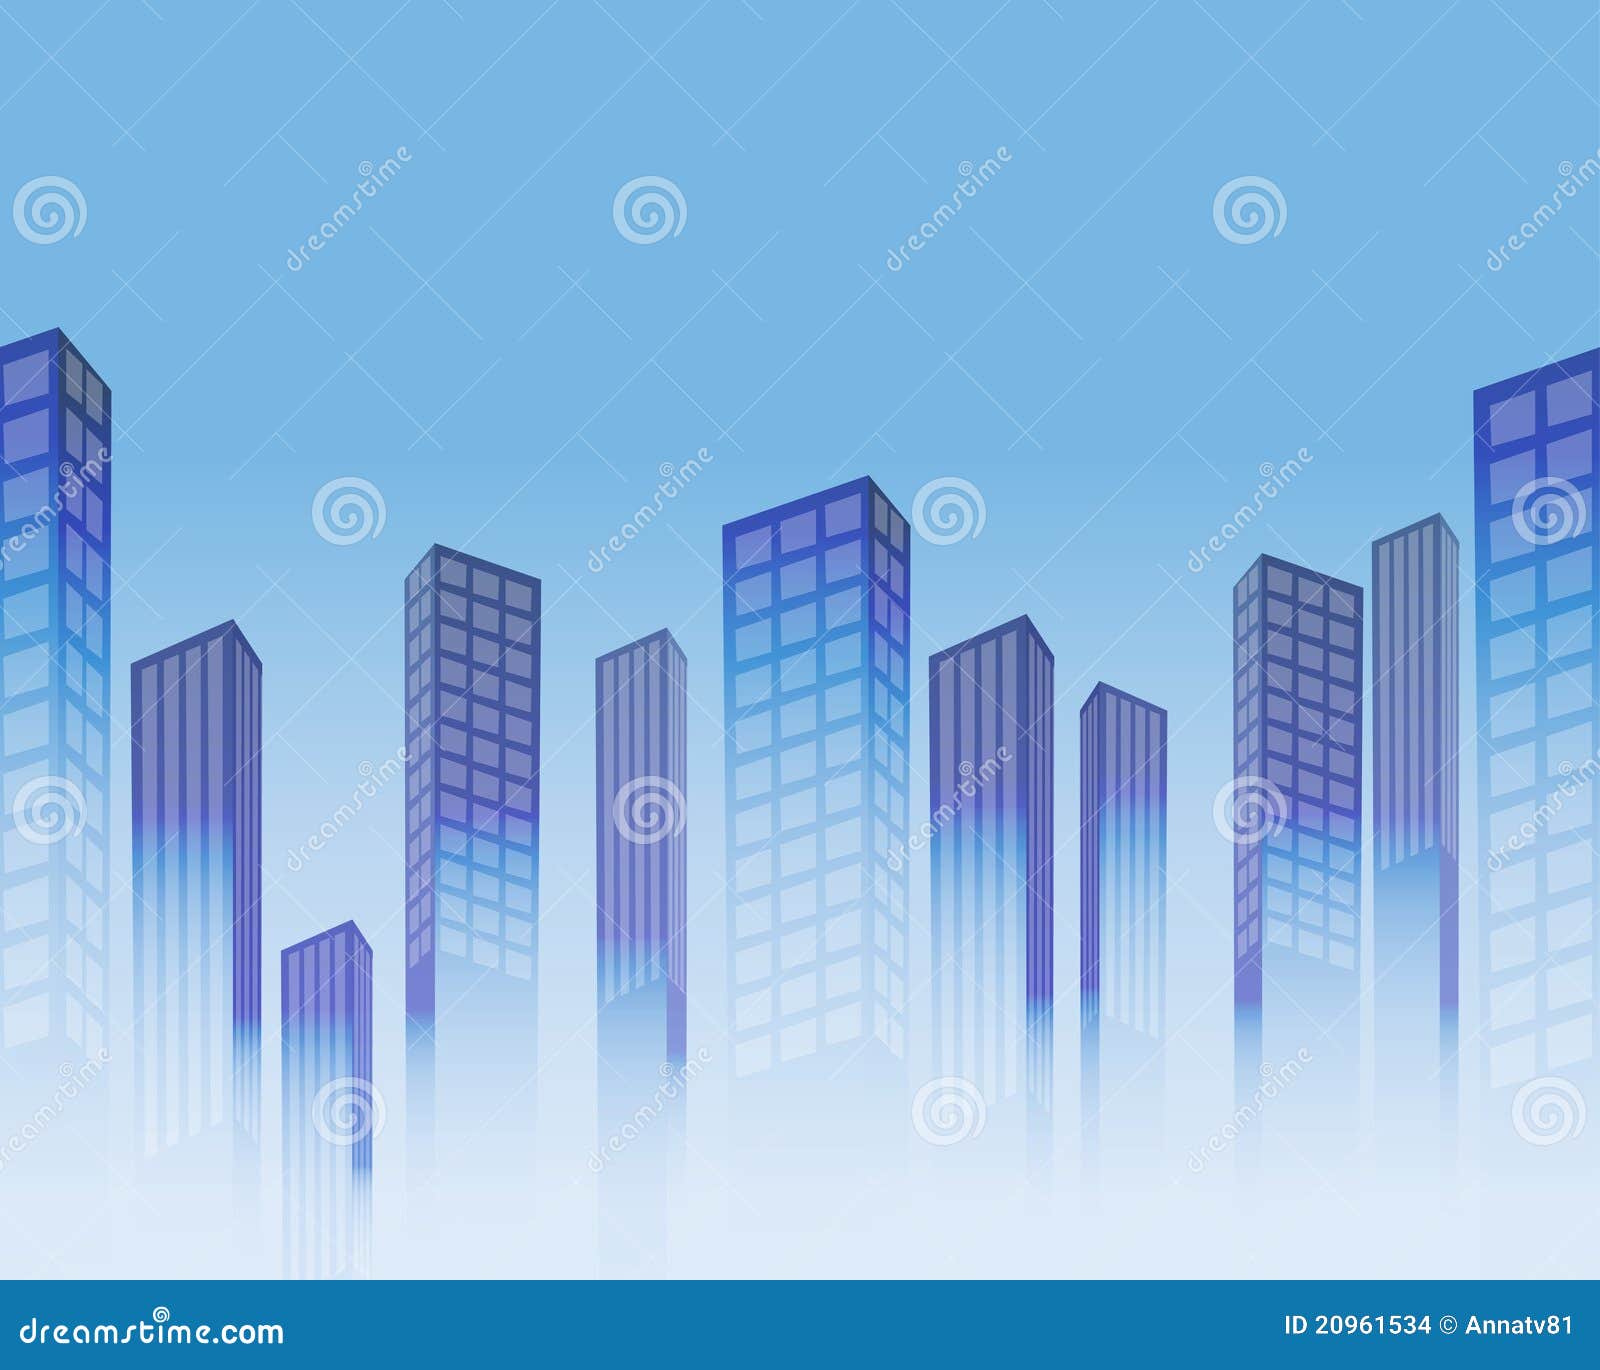 Seamless Background with Stylized Skyscrapers Stock Vector ...